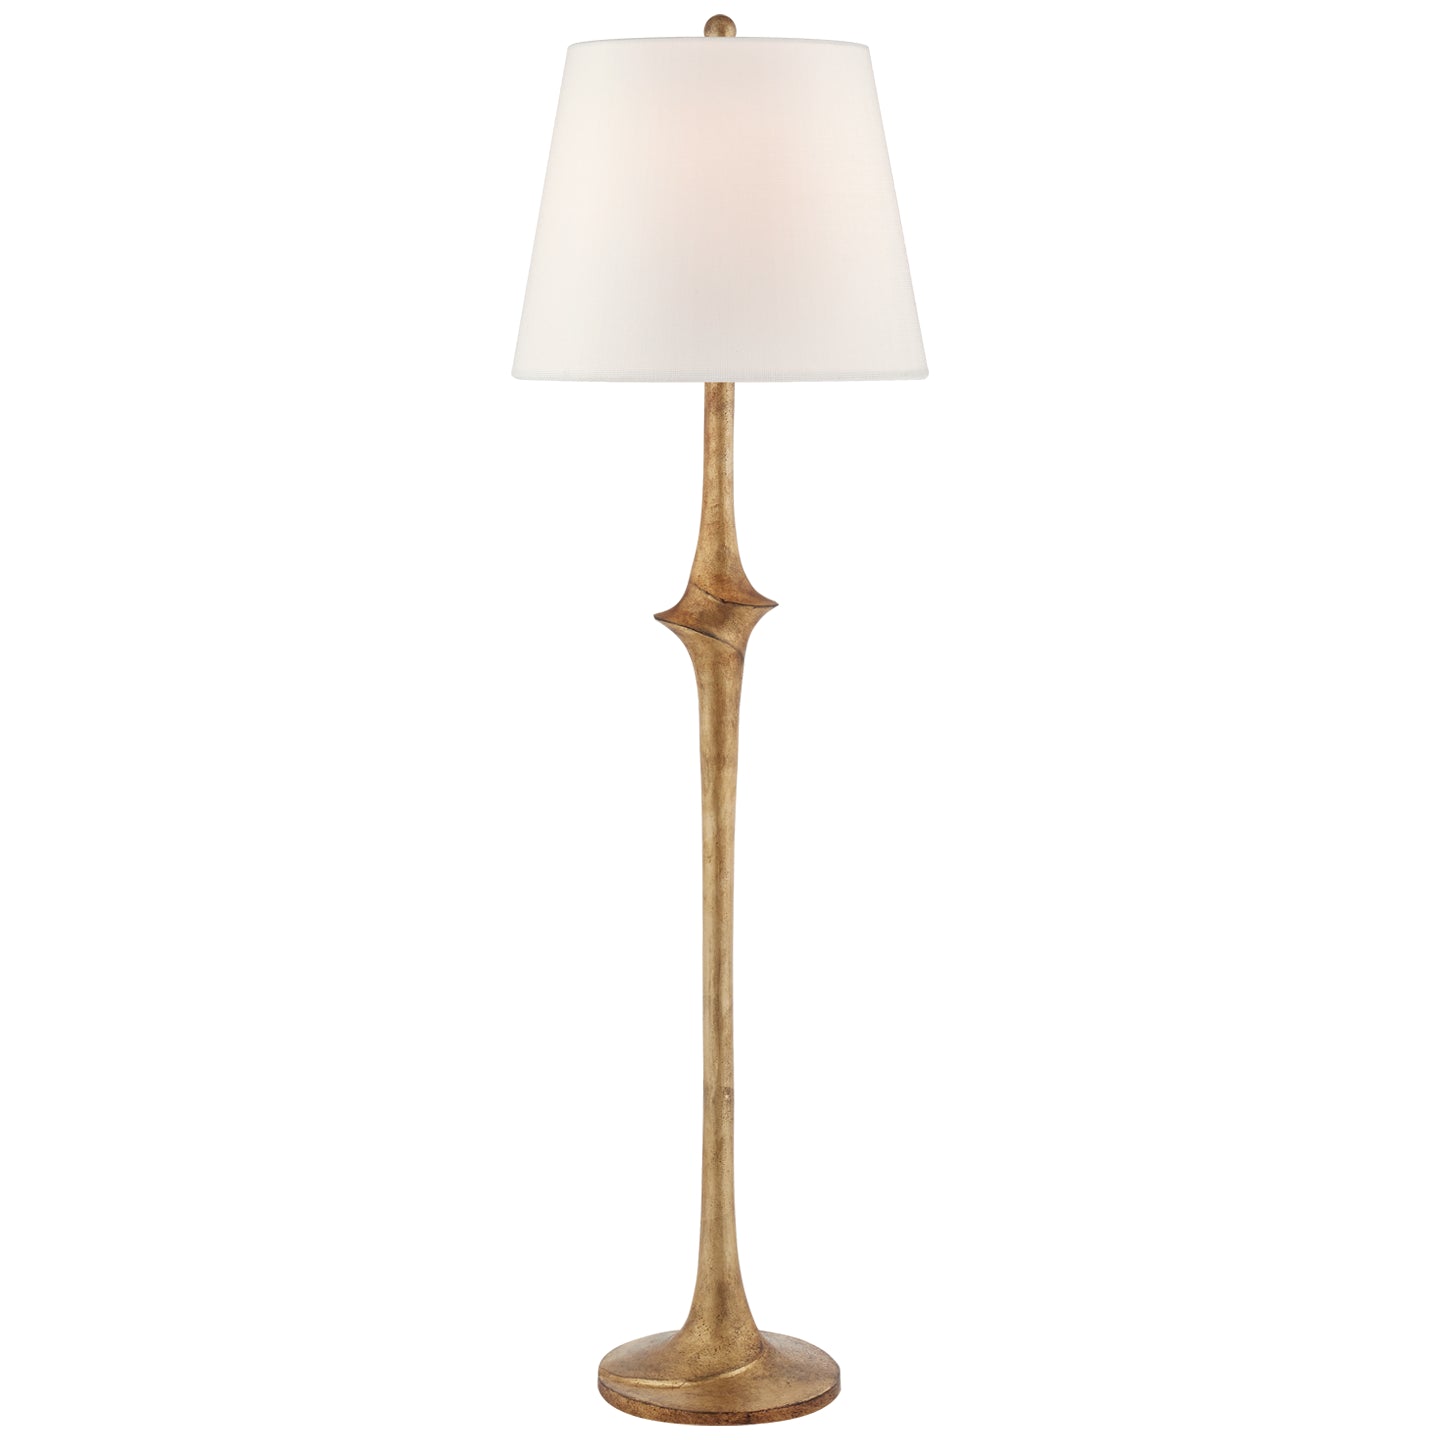 Load image into Gallery viewer, Visual Comfort Signature - CHA 9712GI-L - One Light Floor Lamp - Bates - Gilded Iron
